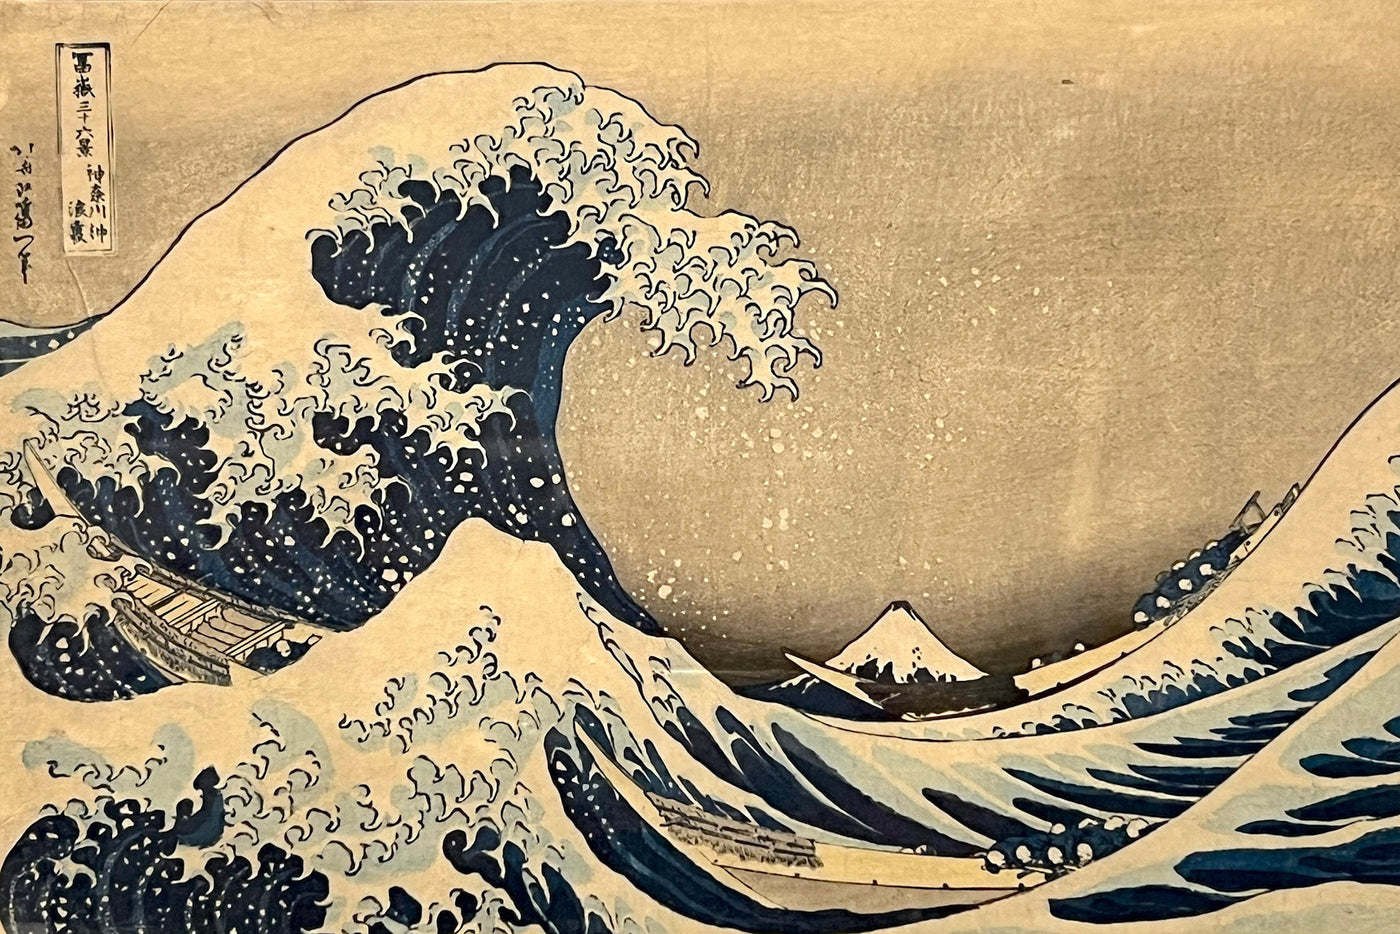 The Great Wave woodblock print by Hokusai